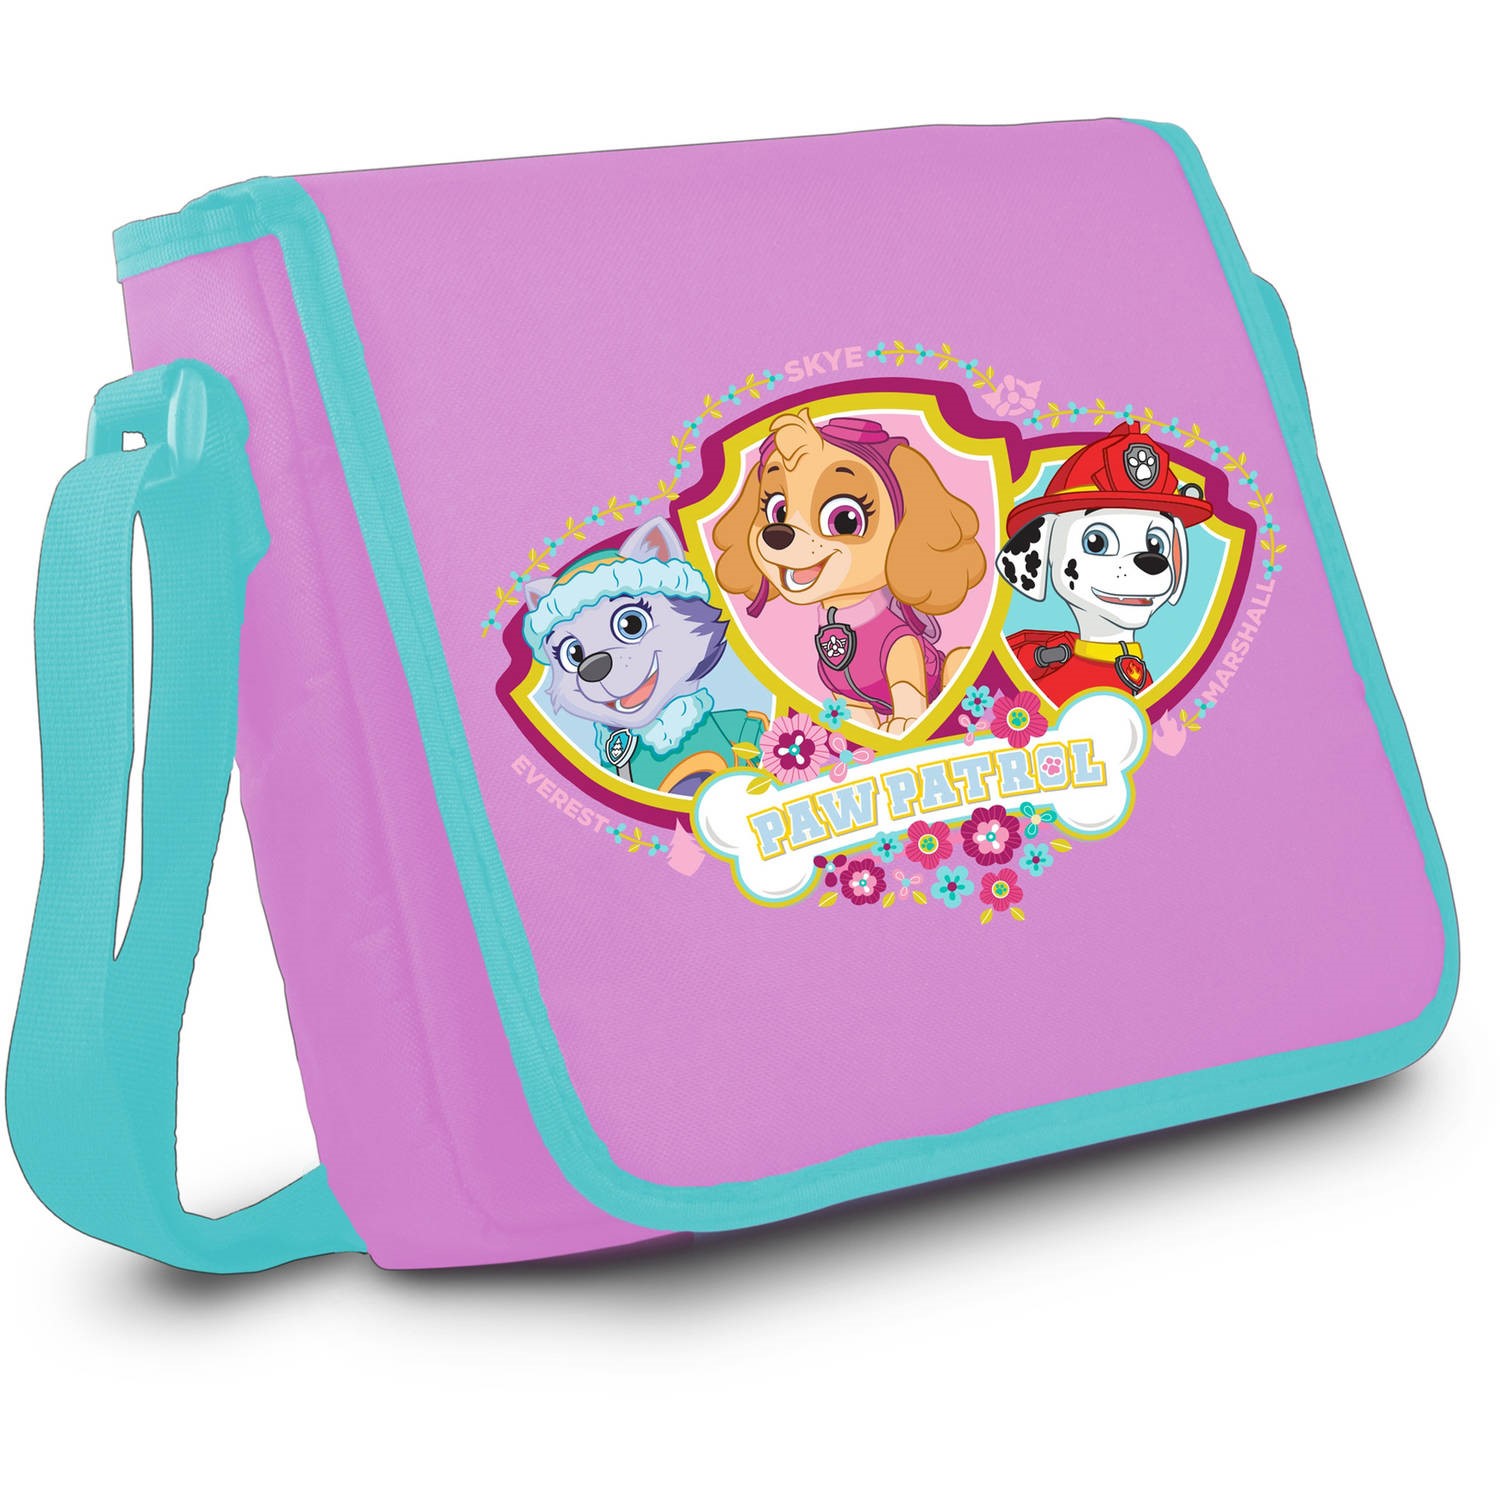 PAW Patrol 7" Portable DVD Player with Carrying Bag and Headphones, Pink - image 2 of 7